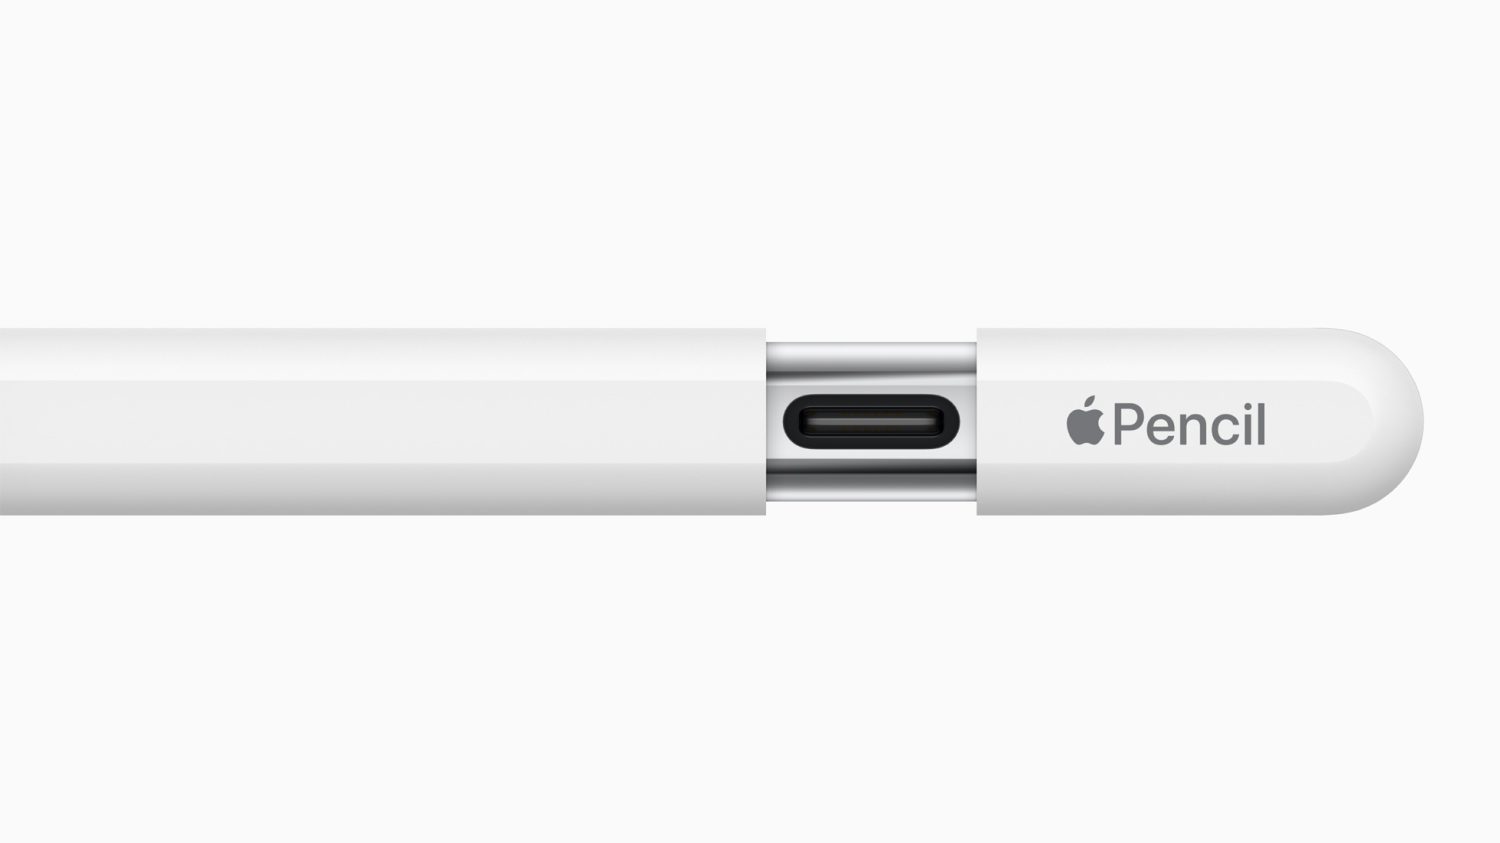 Apple Pencil with USB-C returns to all-time low of $69 with one of 